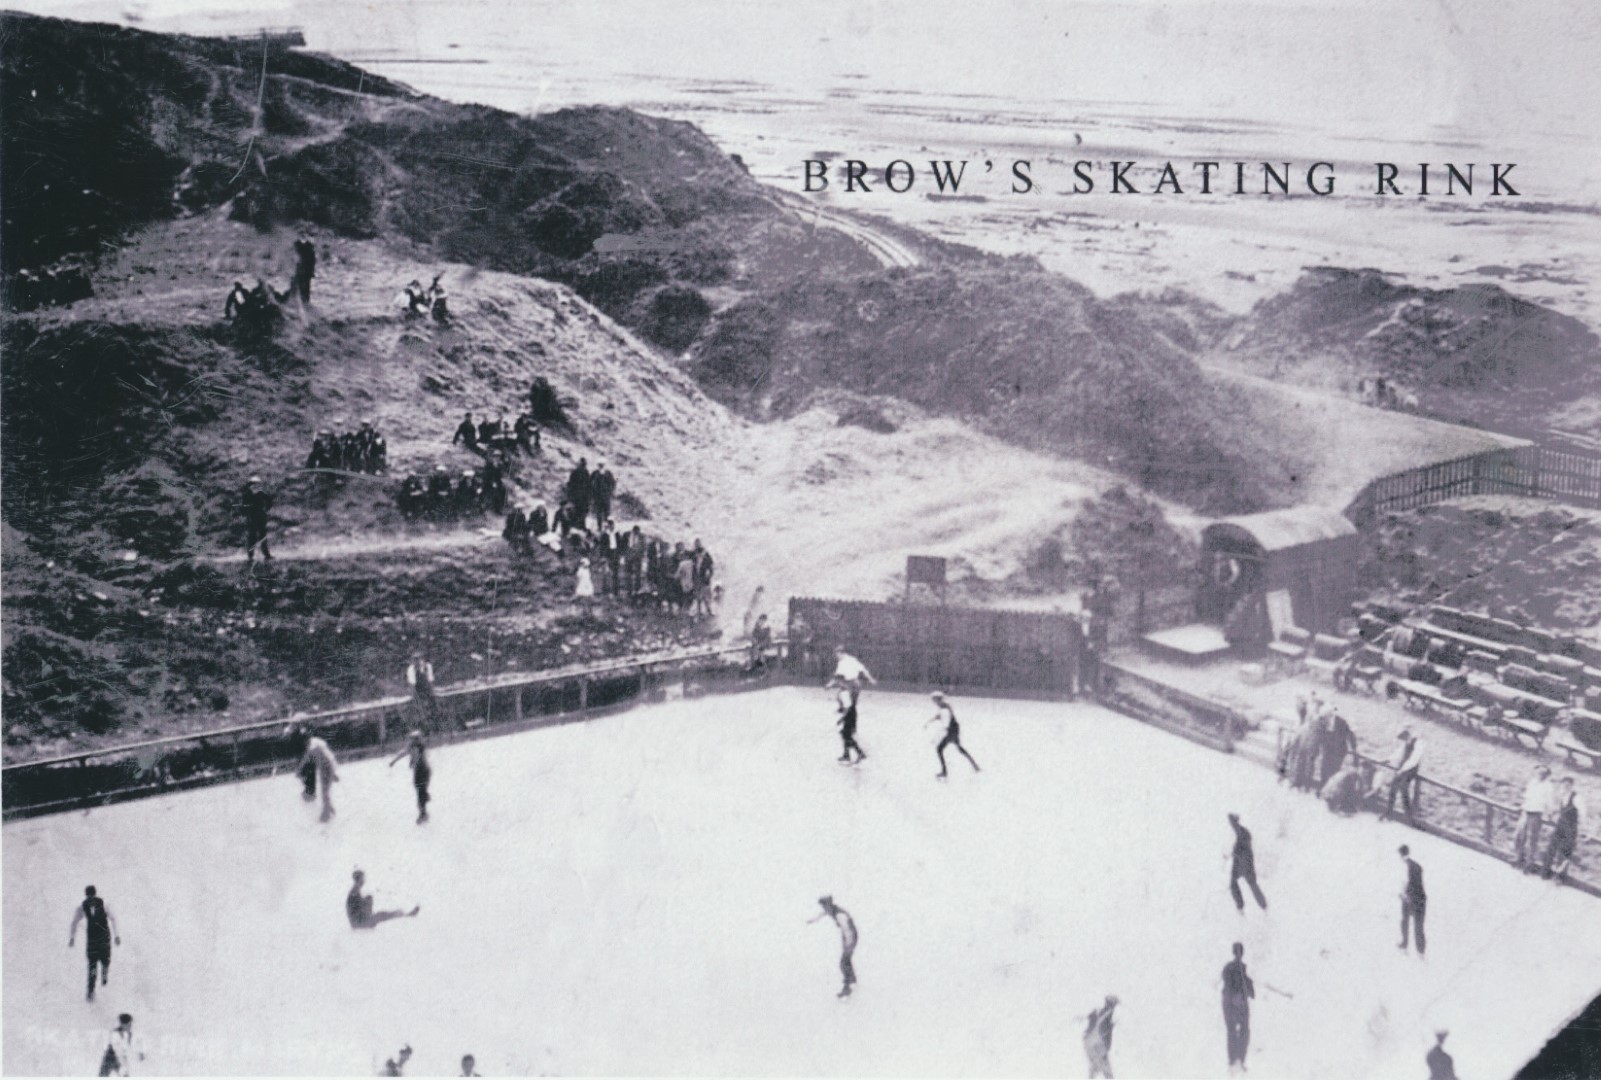 Maryport Sea Brows Skating Rink With Ice Skaters